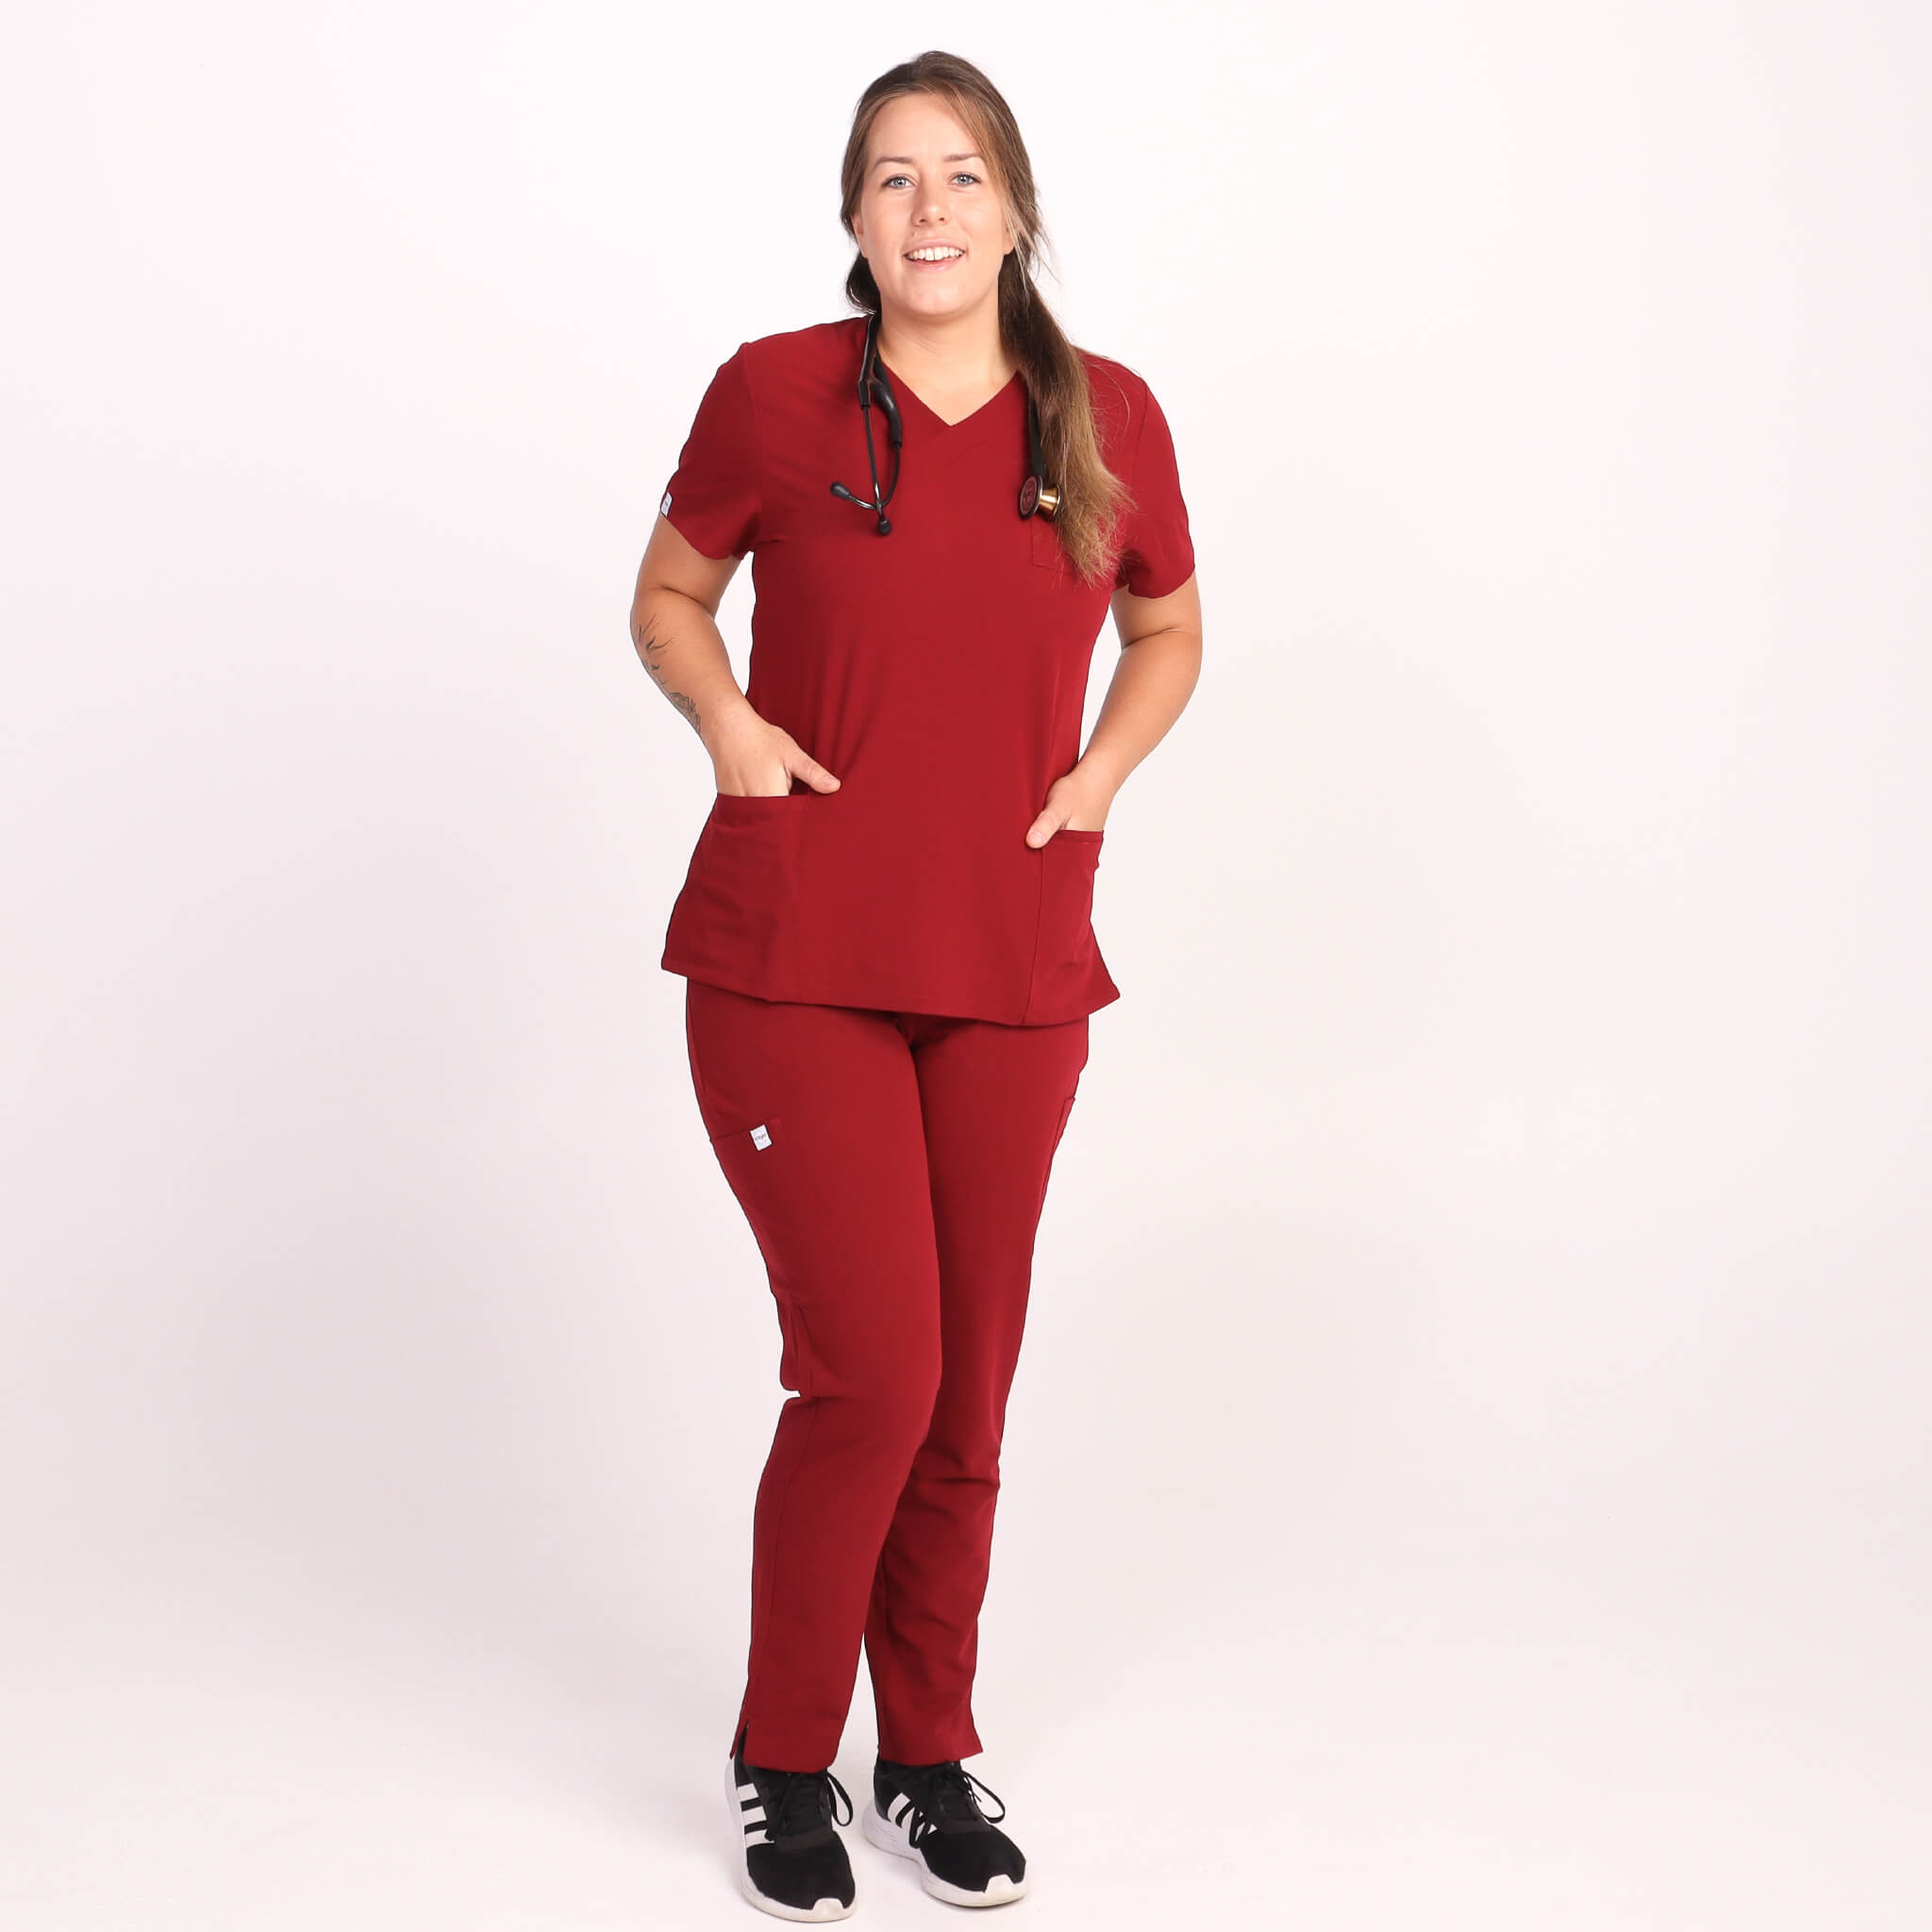 Dress your best in 2022: This year's hottest scrubs for nurses